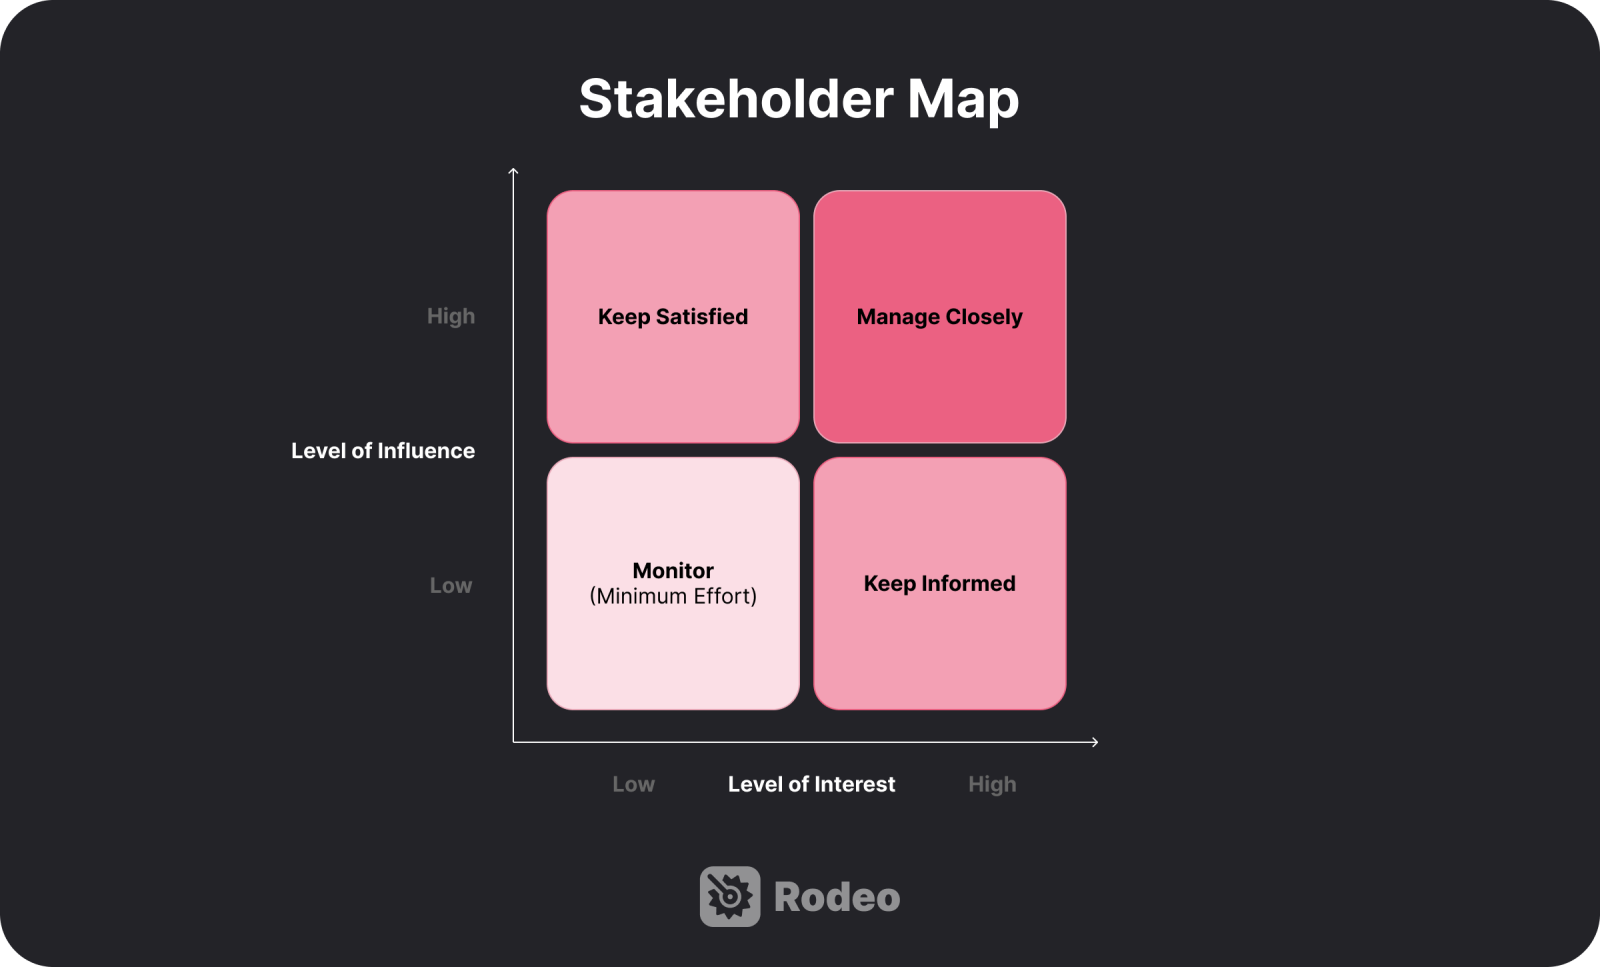 Illustration of a stakeholder map